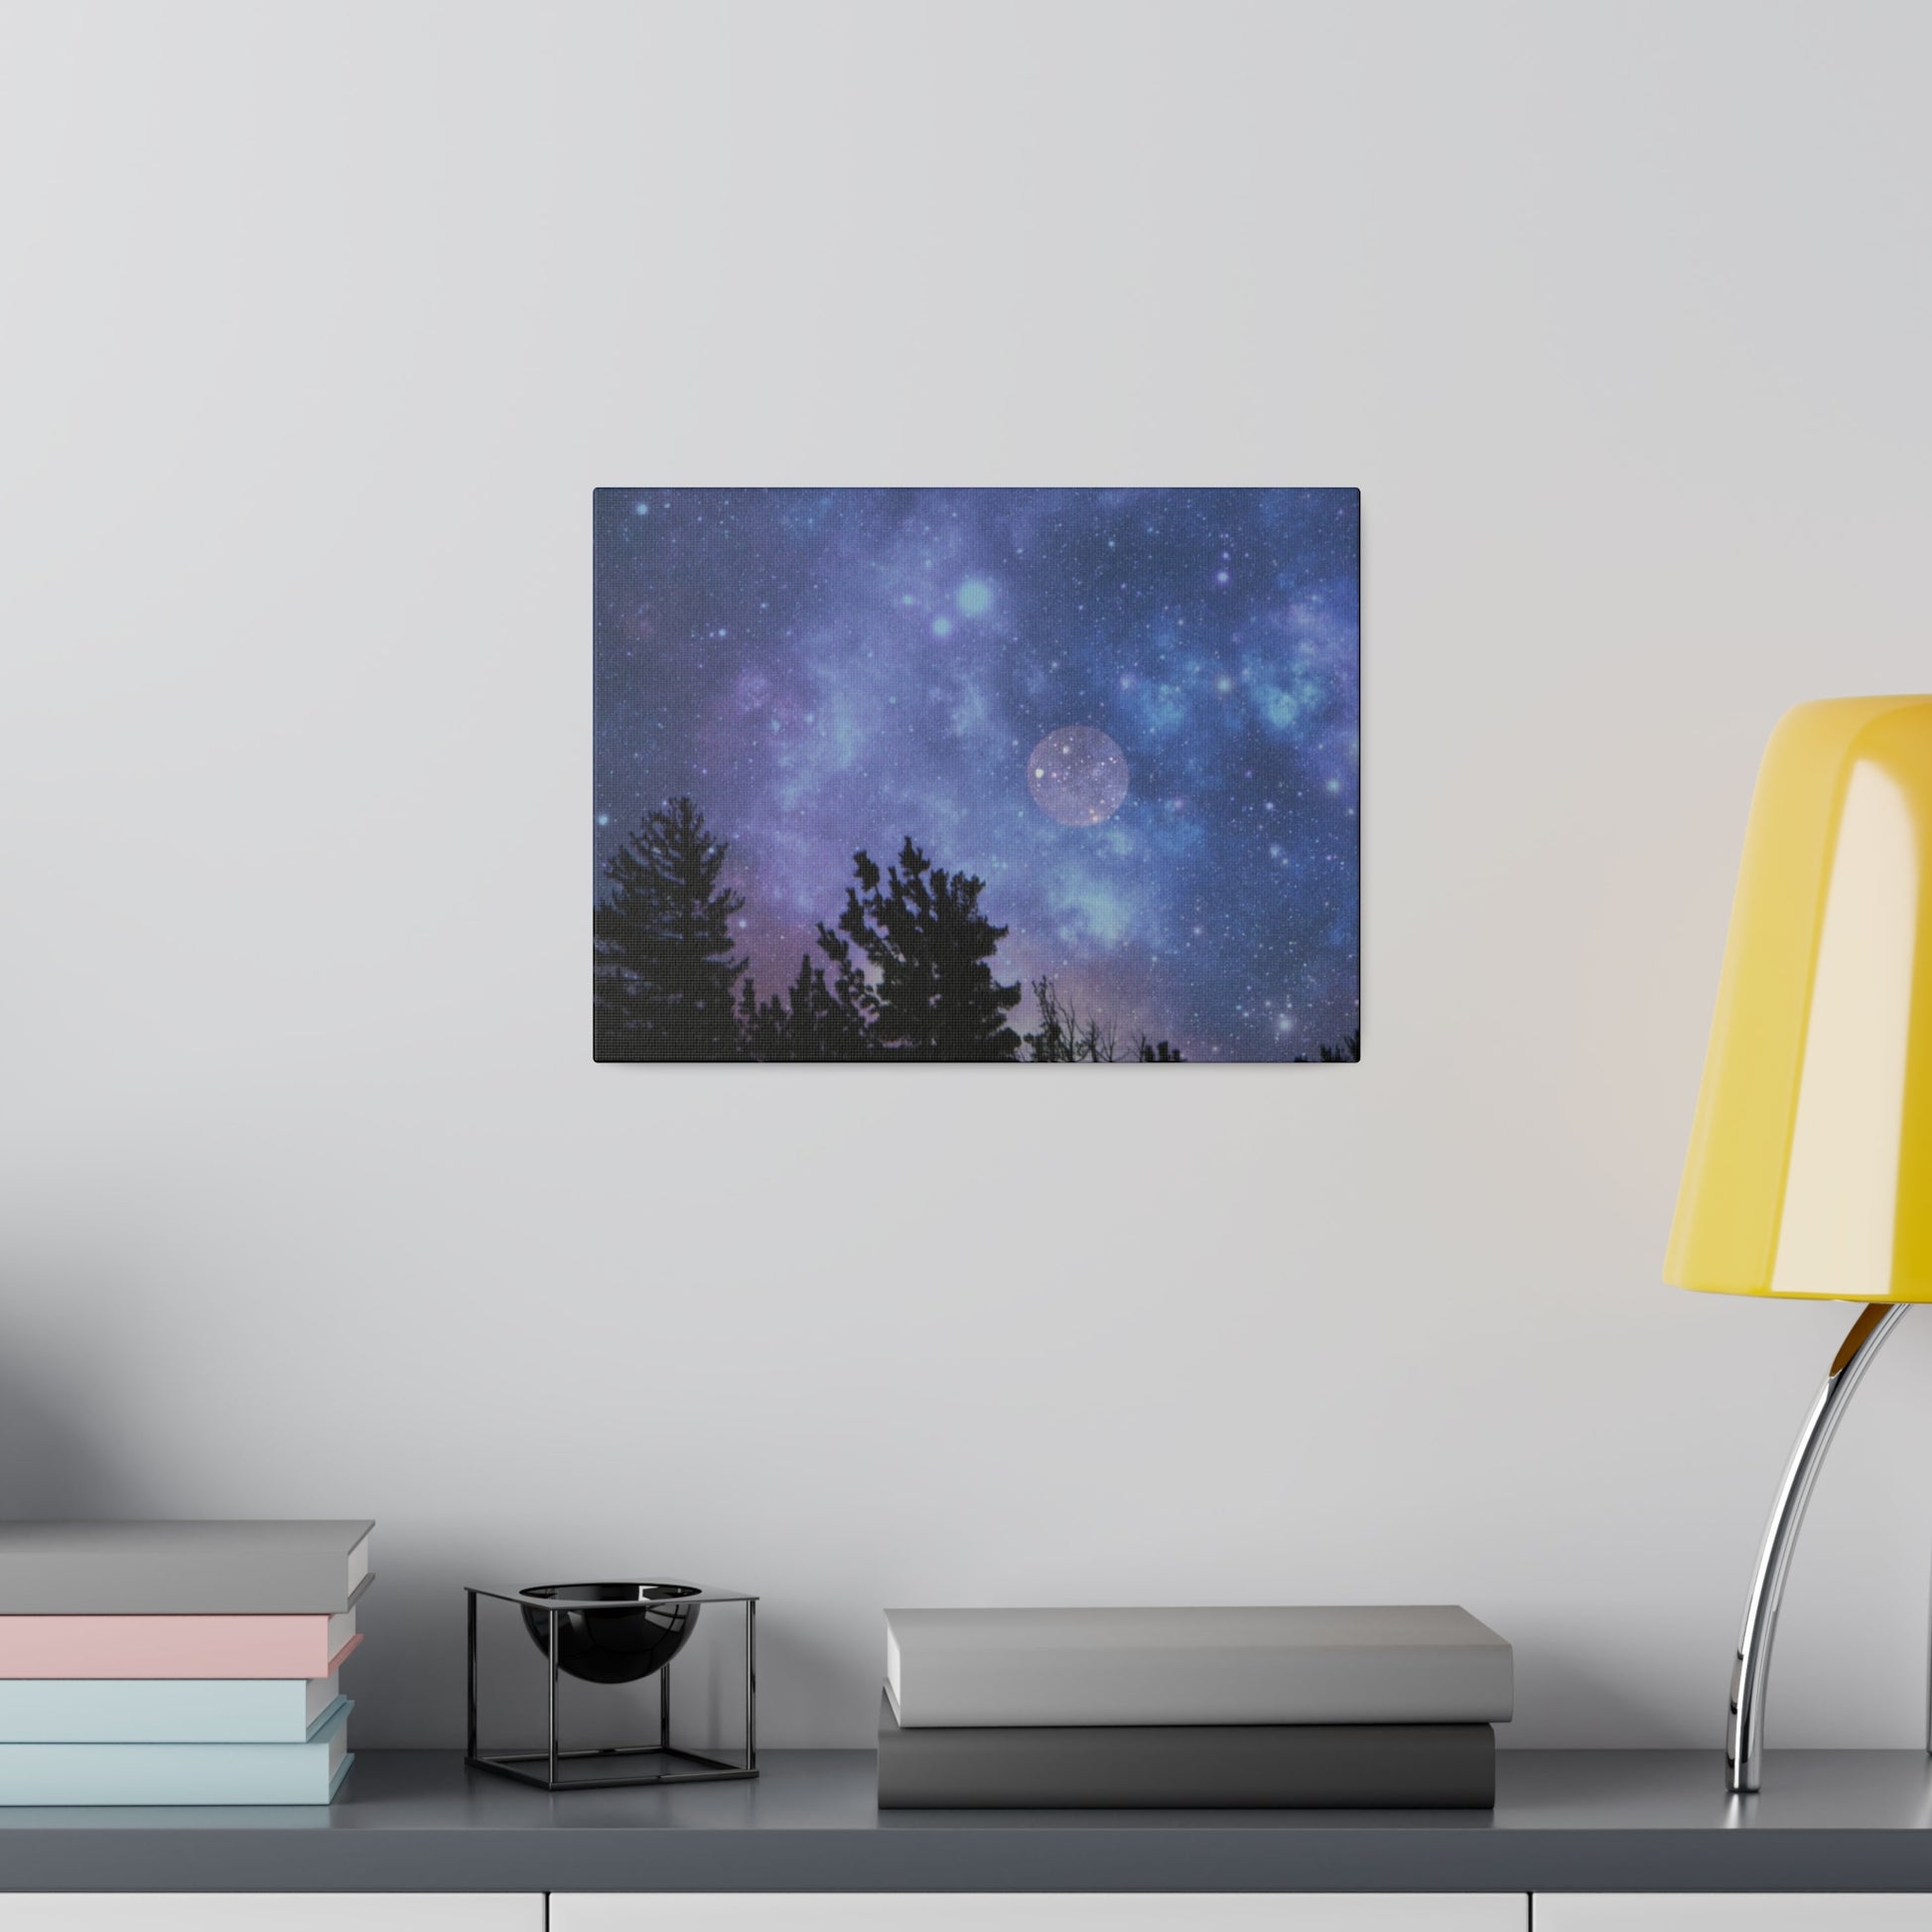 A Printify Blue-Moon Matte Canvas with a cosmic scene hangs on a wall above a stack of books next to a yellow lamp.